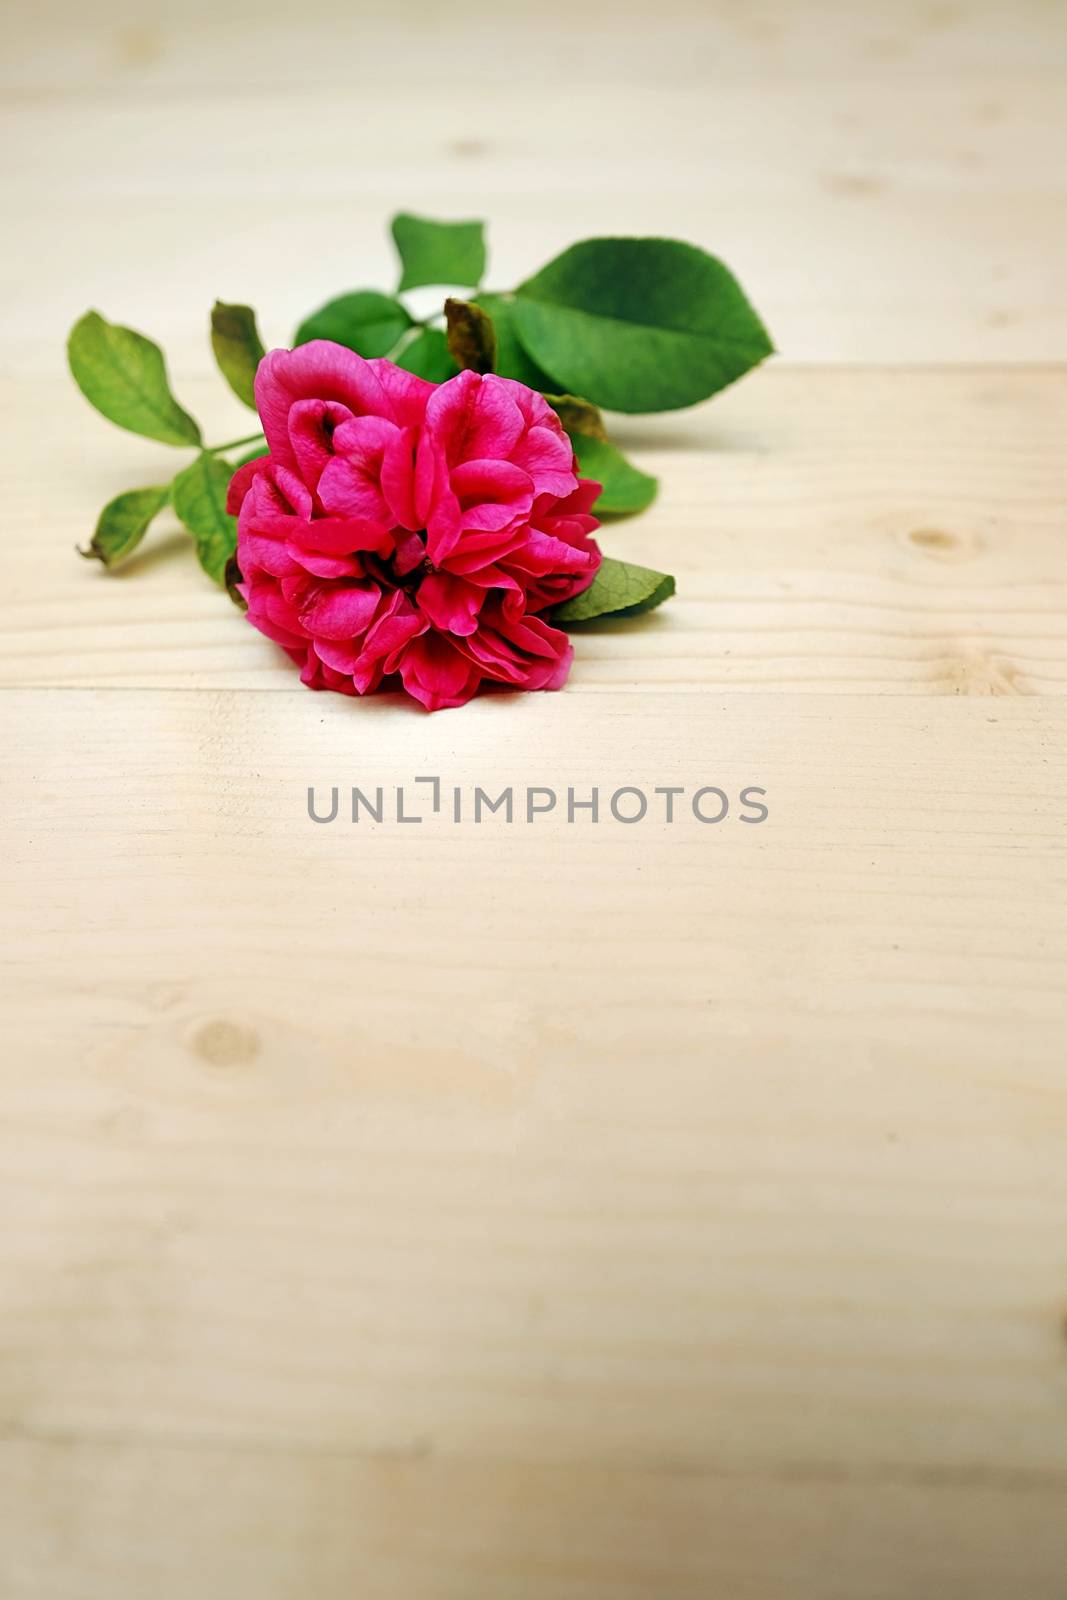 Chubby Pink Rose Flower on the Table Wood by aonip